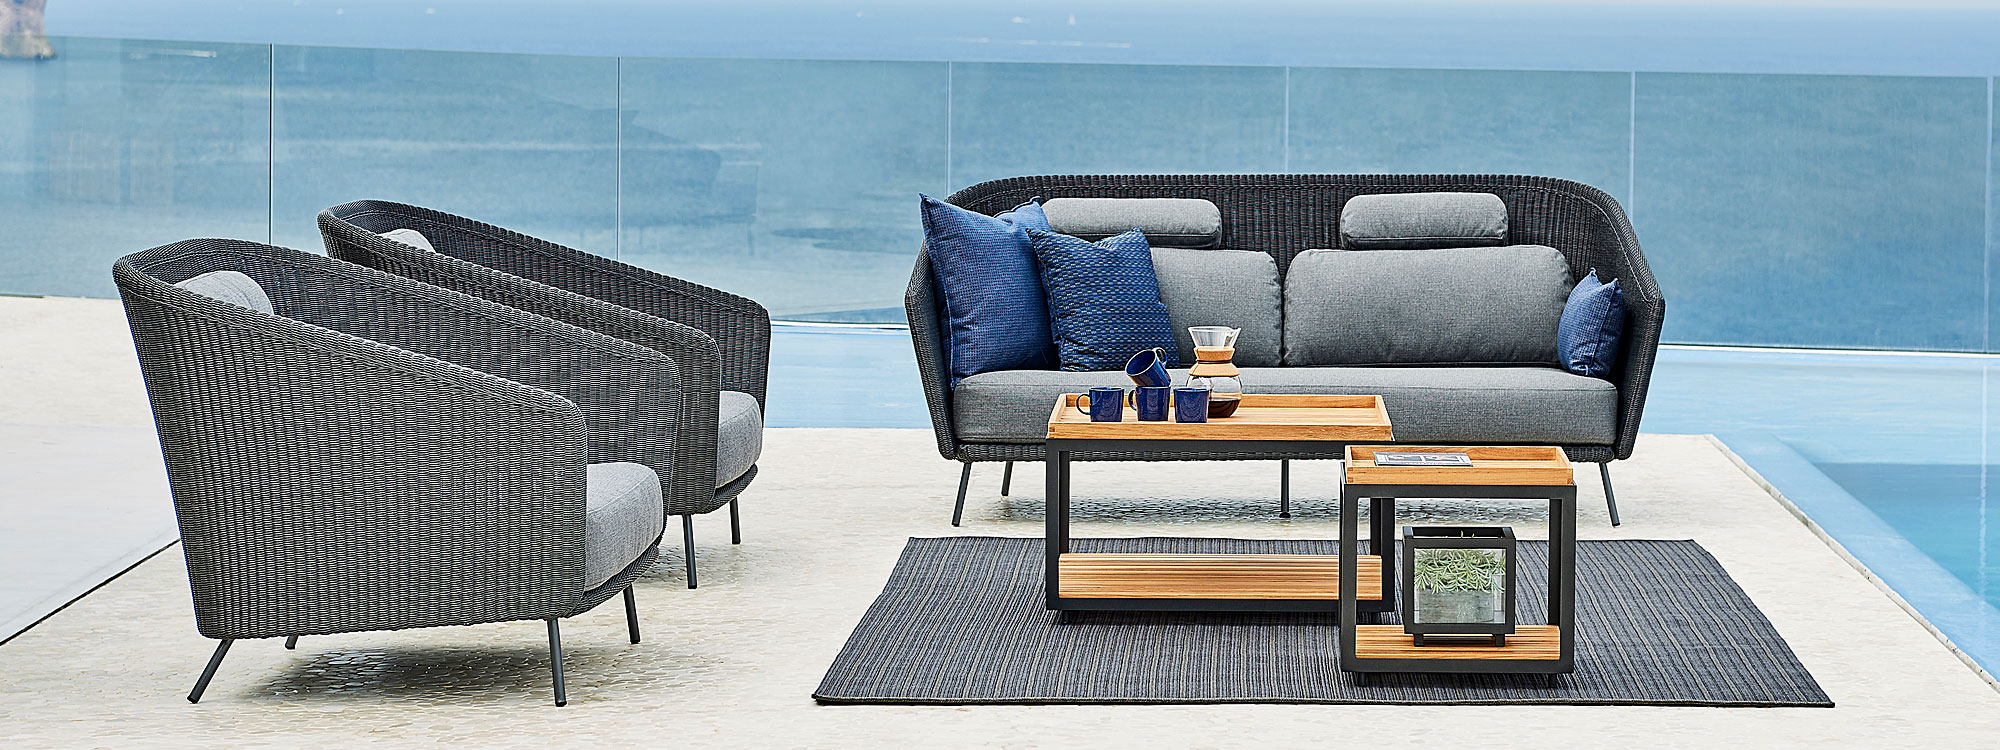 Image of Cane-line Mega graphite lounge chairs and 2 seat garden sofa with Level teak low tables in the center